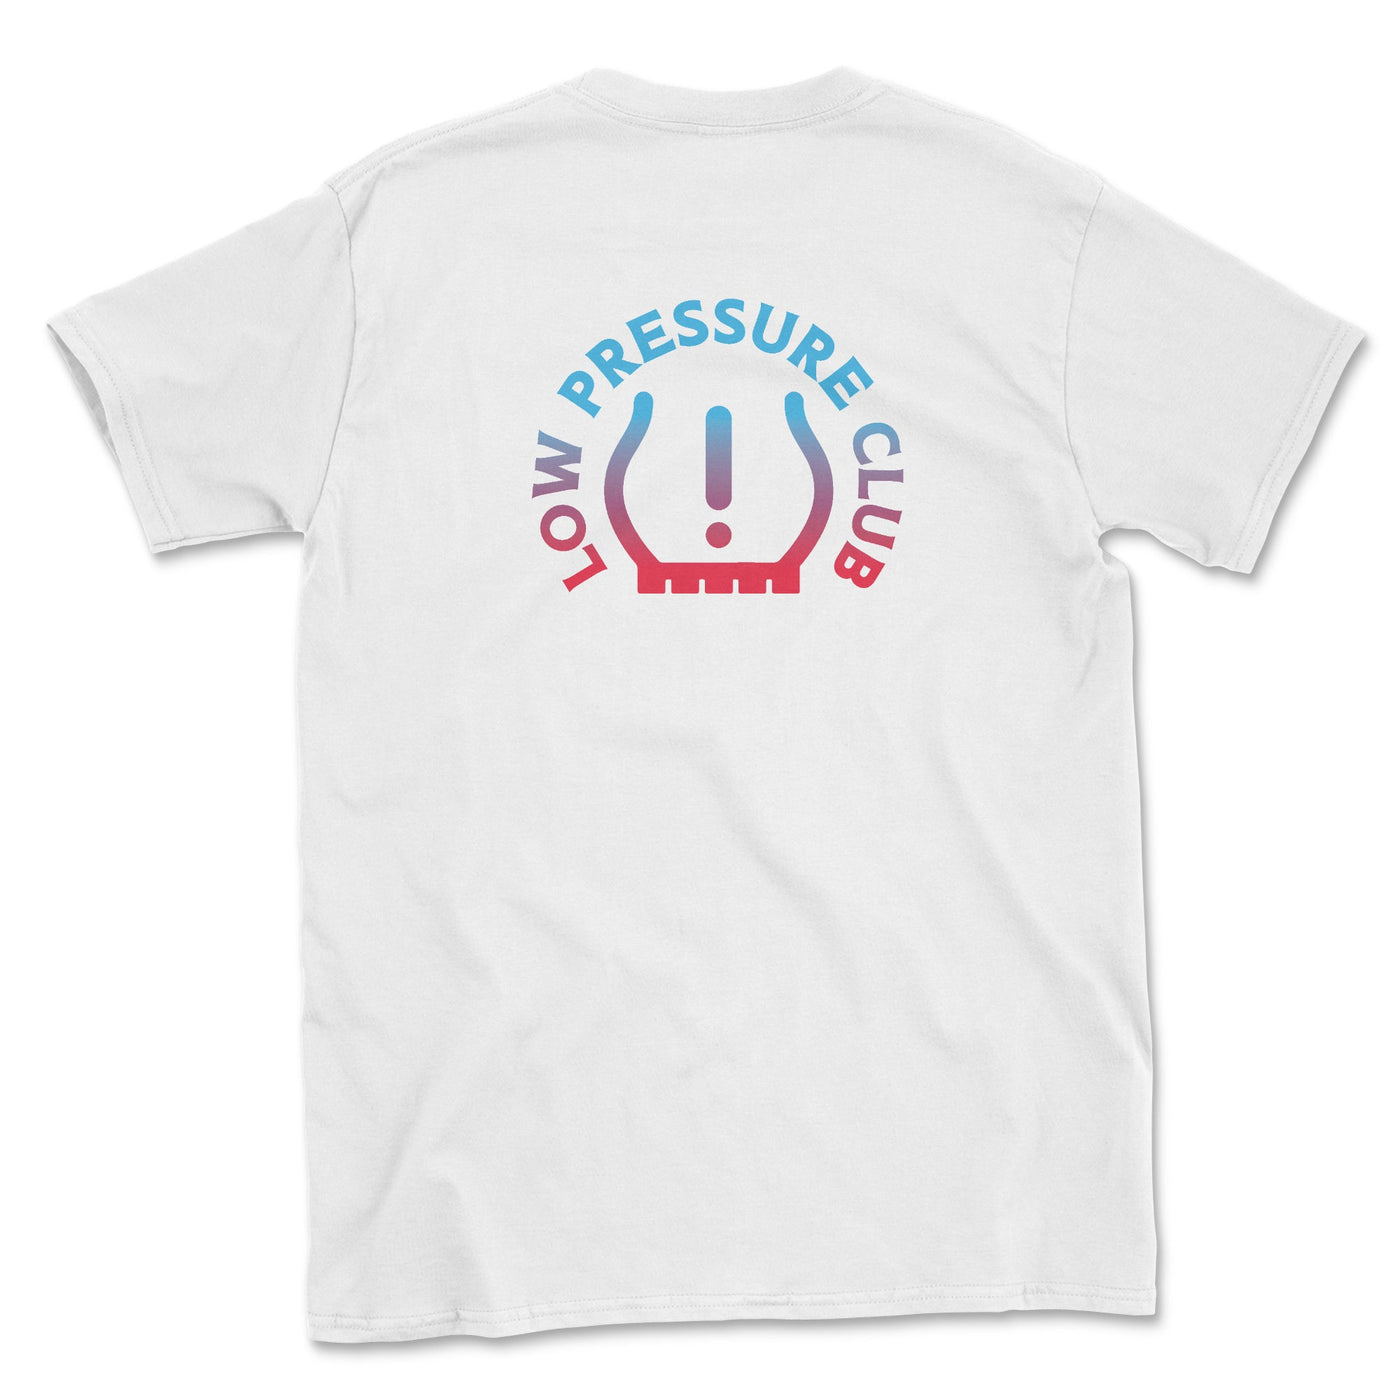 Low Tire Pressure Tee - Goats Trail